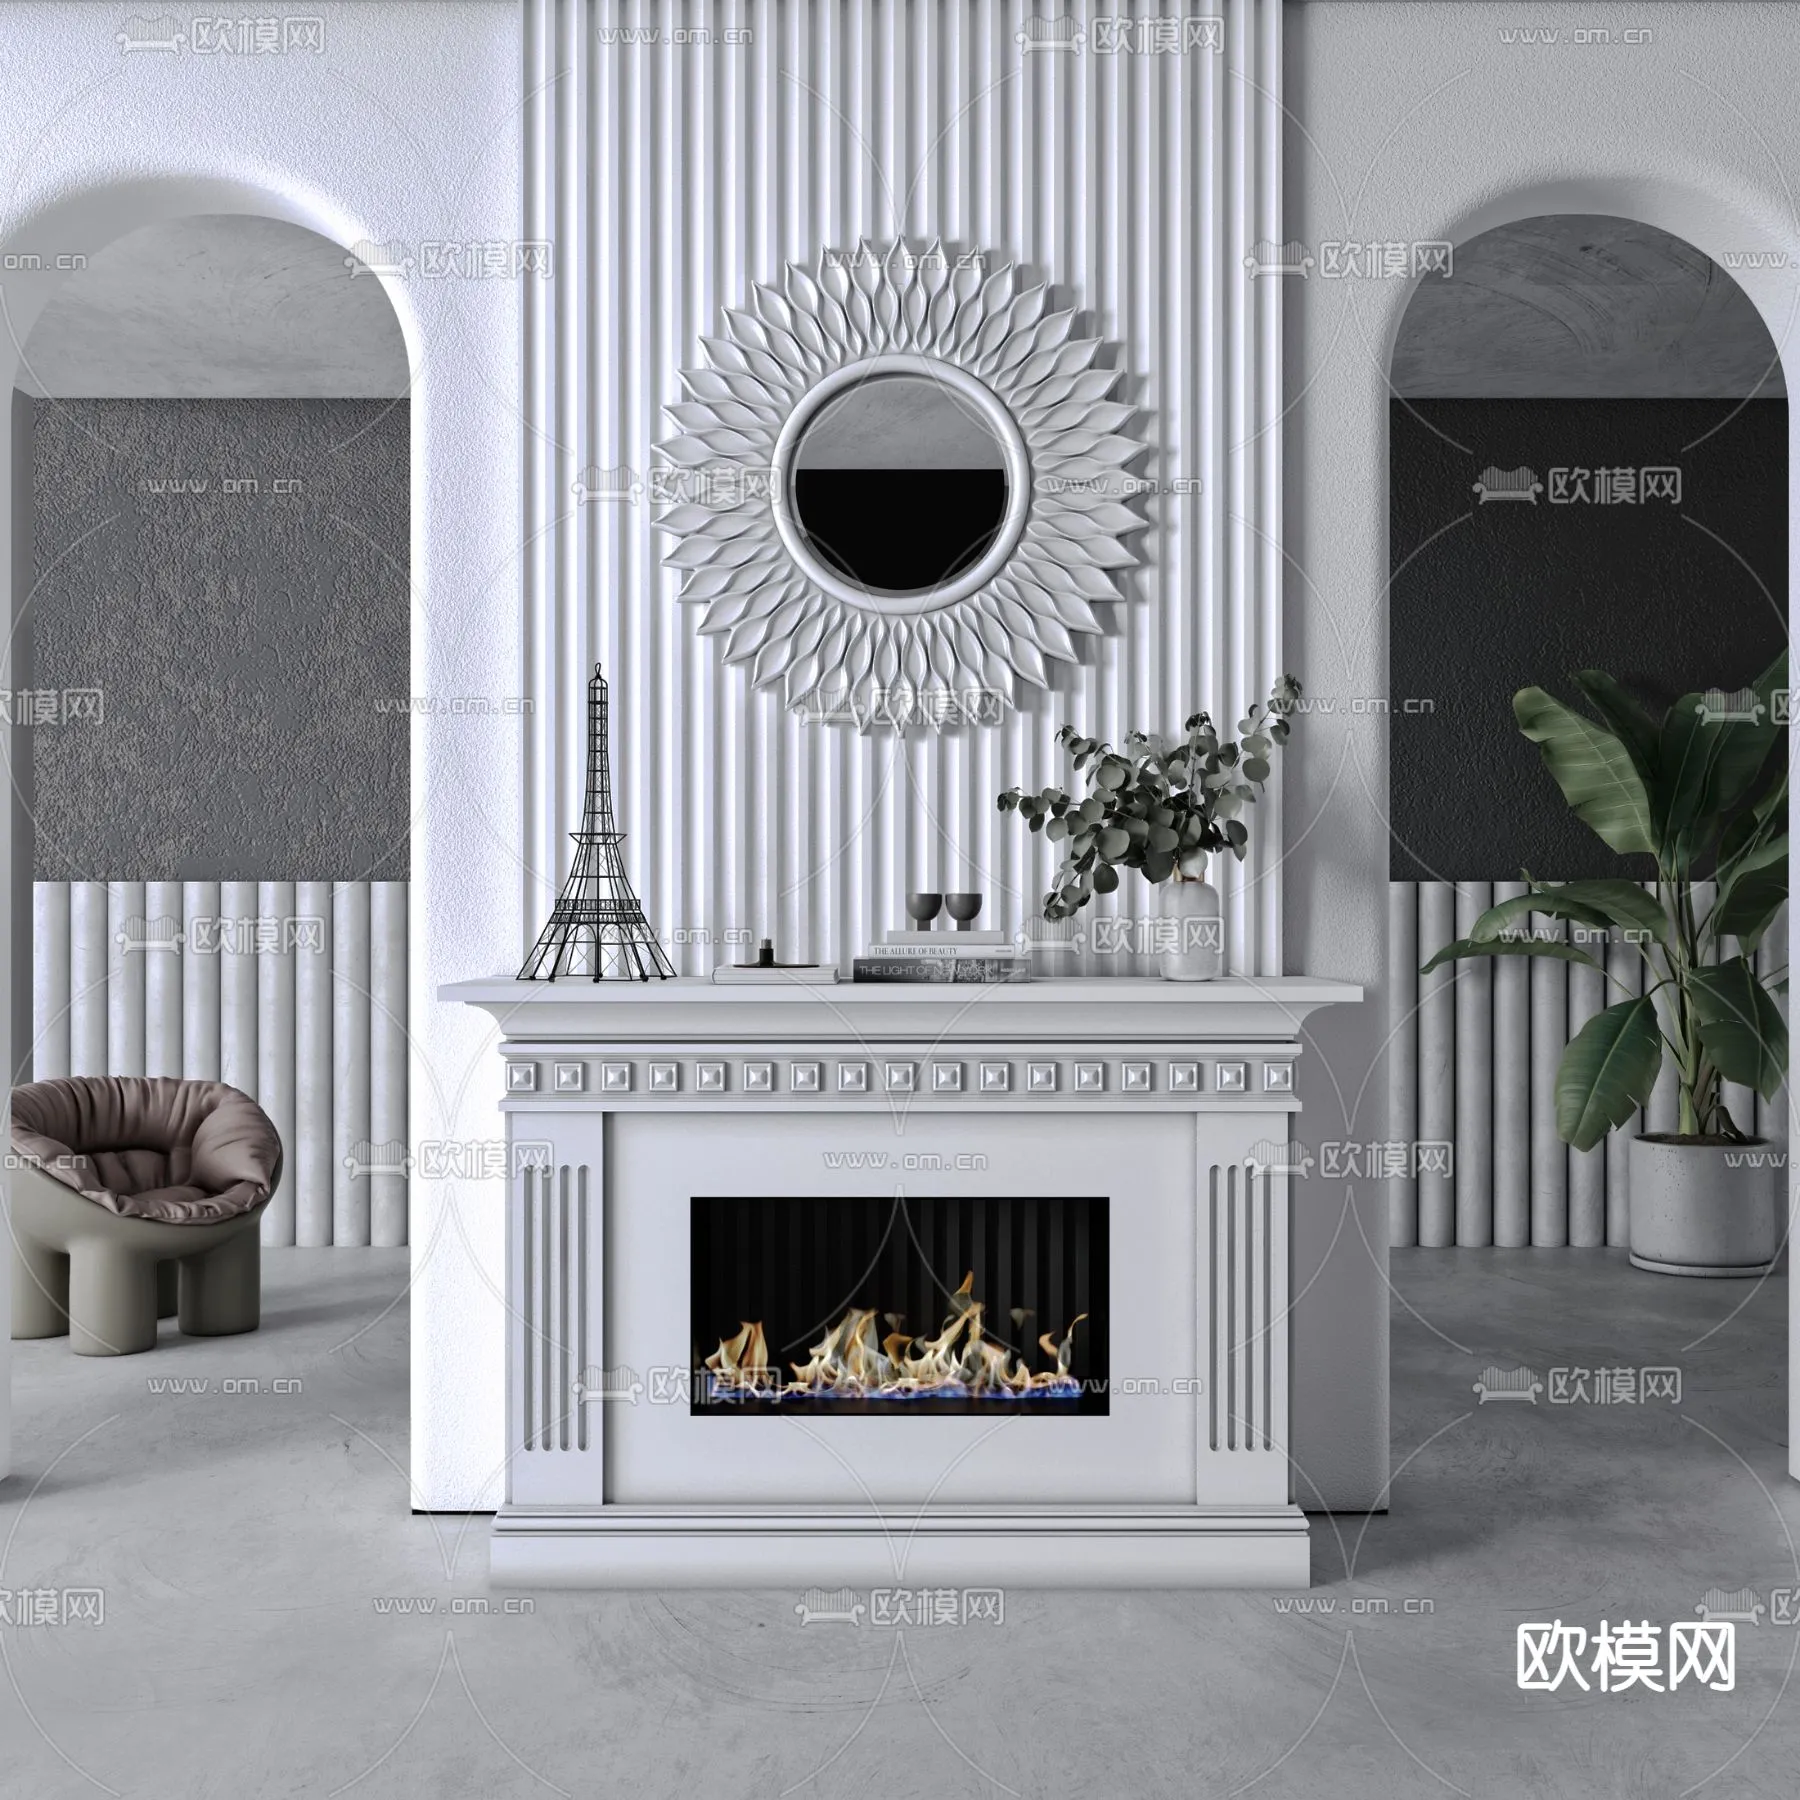 CLASSIC – FIREPLACE 3DMODELS – 067